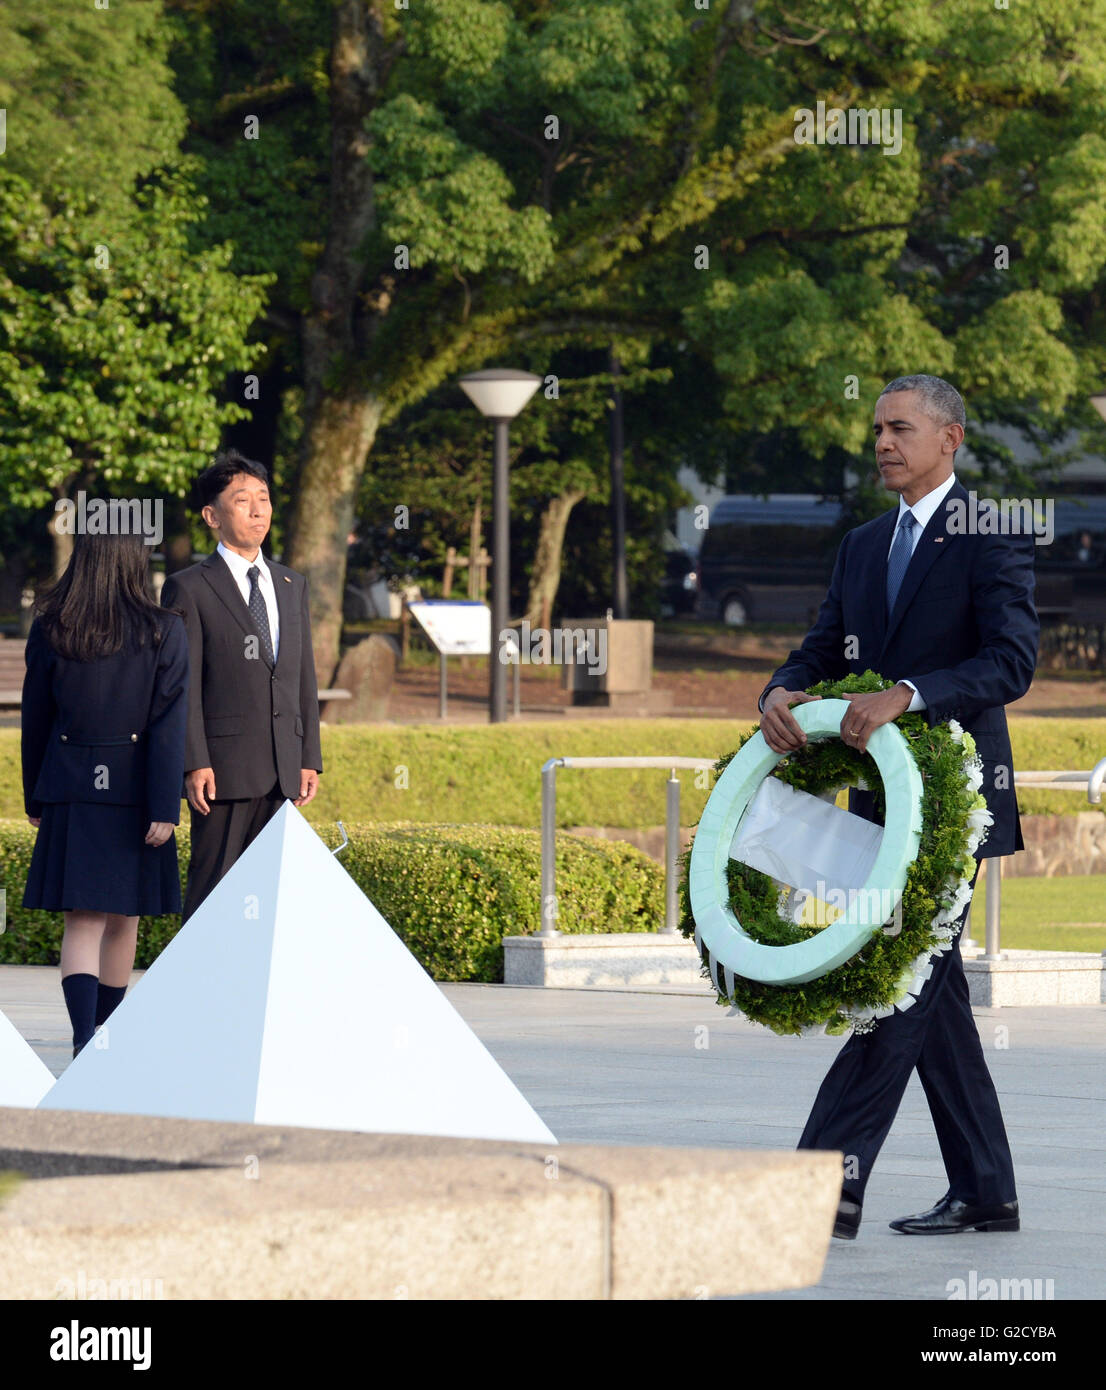 Hiroshima. 27th May, 2016. U.S. President Barack Obama (R) lays a wreath in front of the cenotaph during his visit to the Hiroshima Peace Memorial Park in Hiroshima, Japan on May 27, 2016. Barack Obama on Friday became the first incumbent U.S. president to visit Hiroshima since America dropped an atomic bomb on the city 71 years ago, stirring mixed feelings among the United States, Japan and the victim countries during WWII. © Ma Ping/Xinhua/Alamy Live News Stock Photo